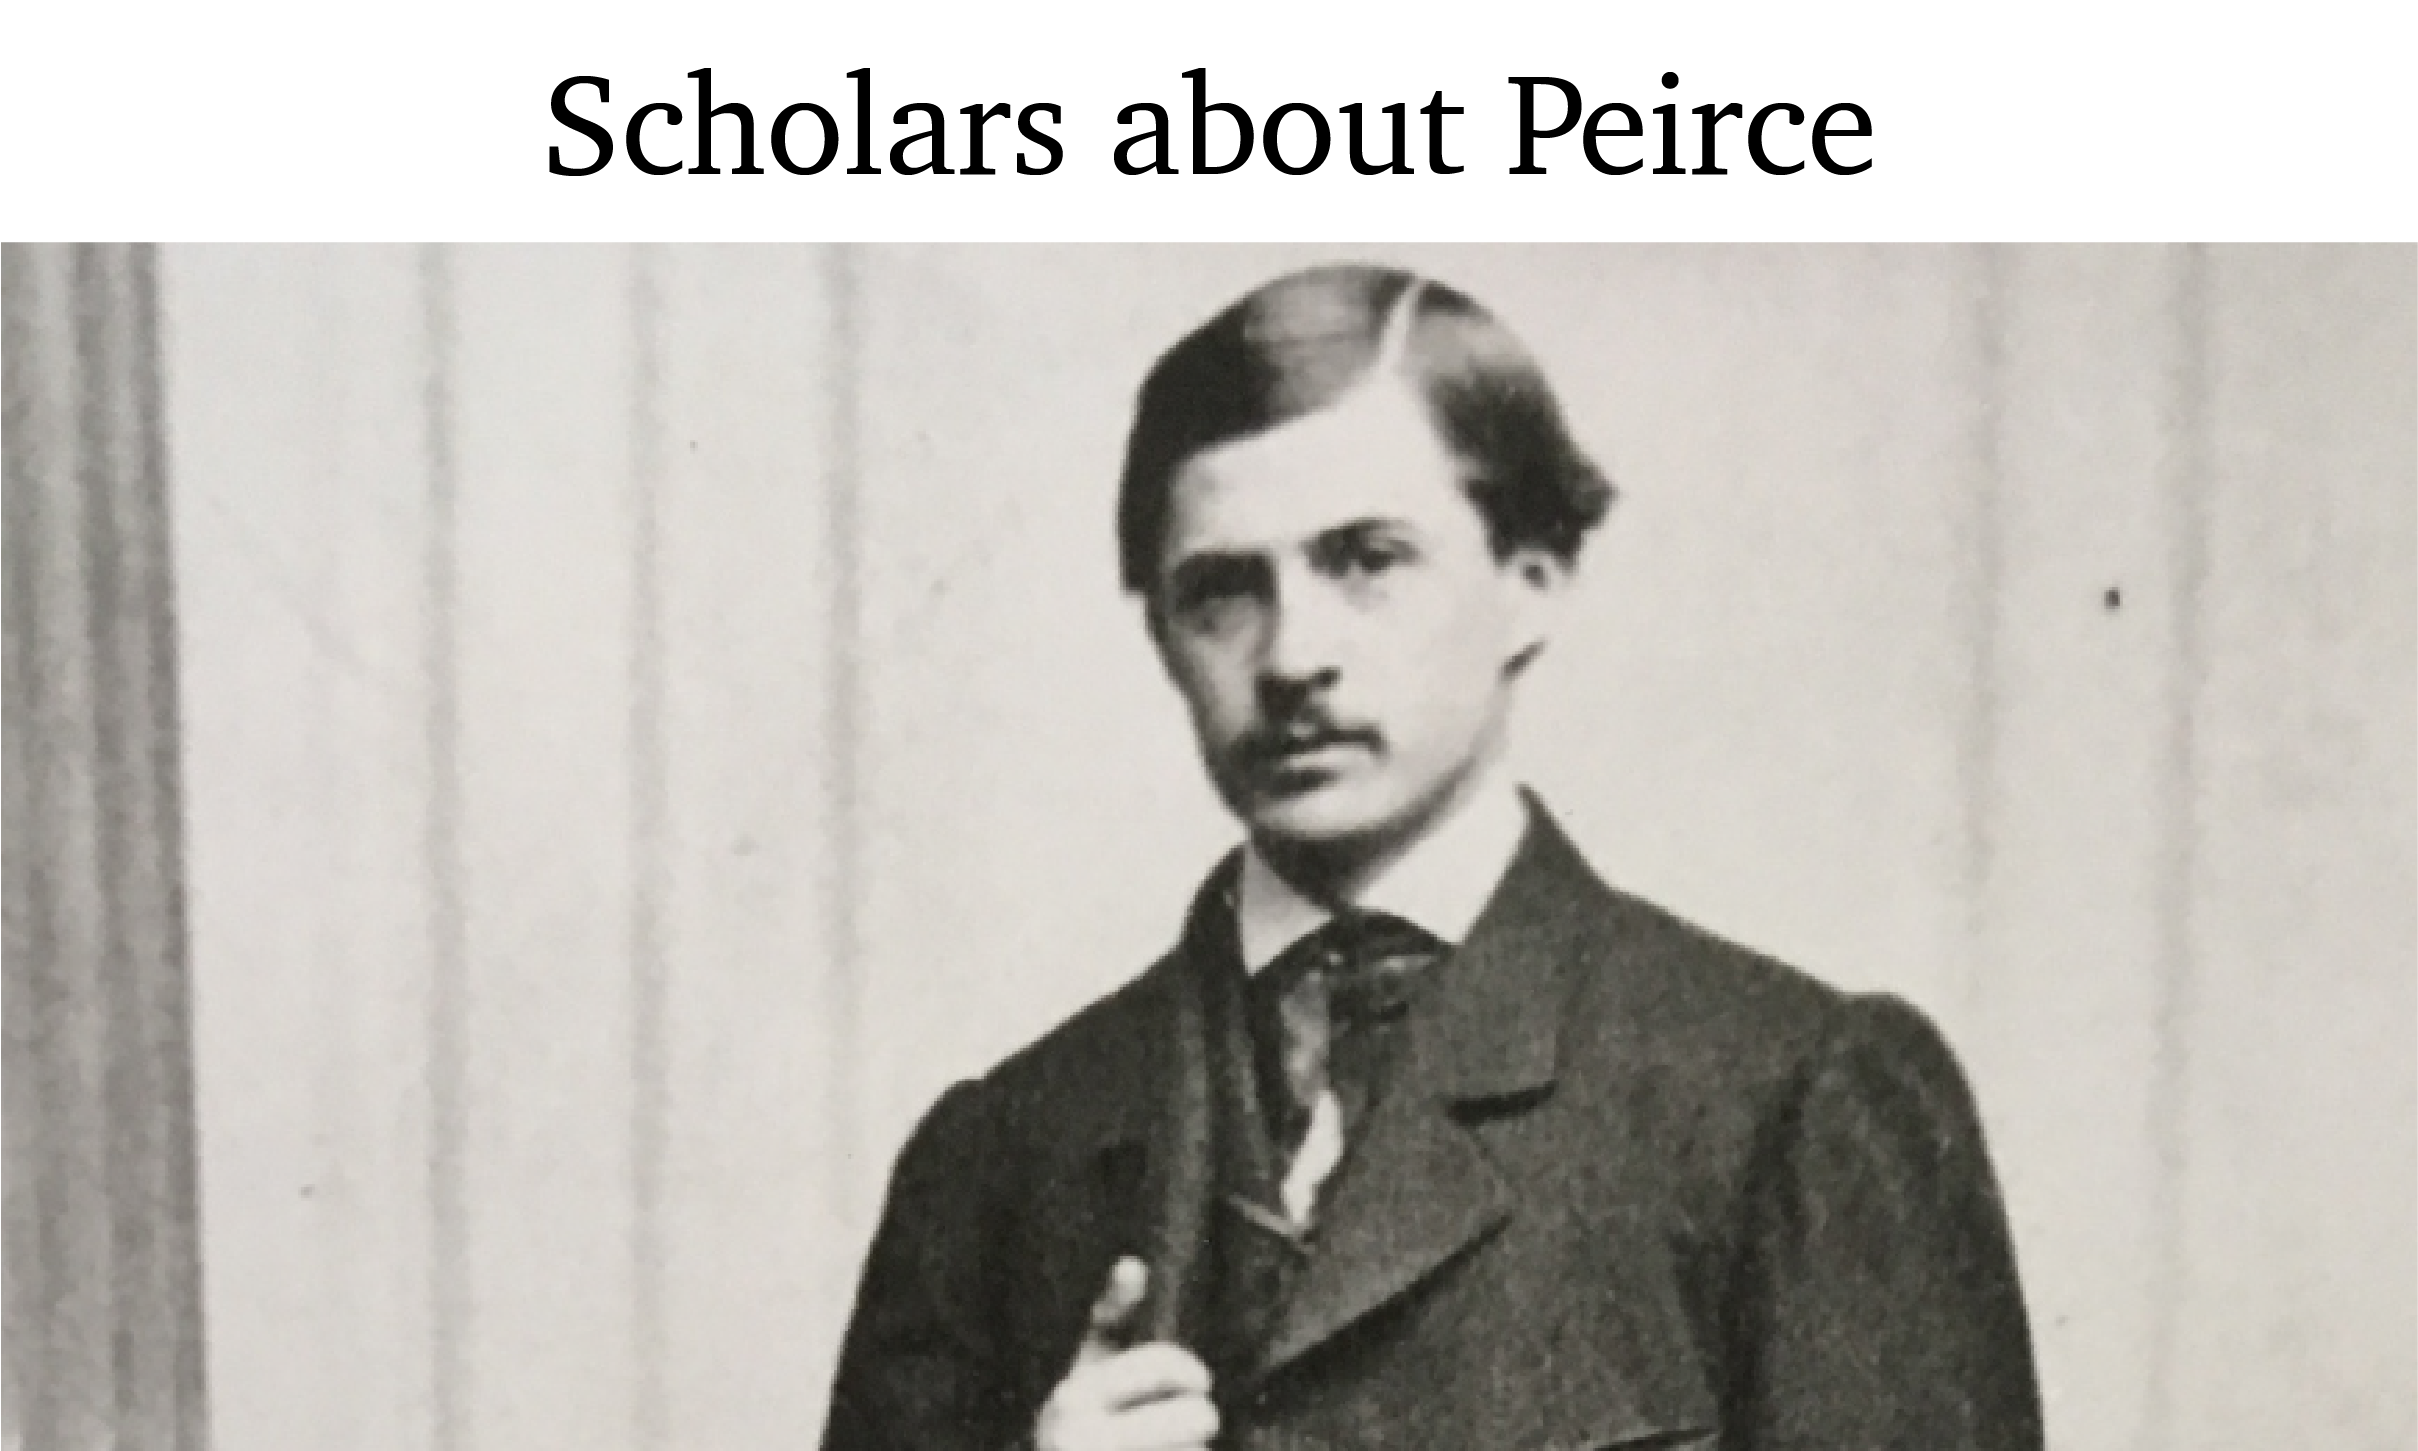 Scholars about Peirce